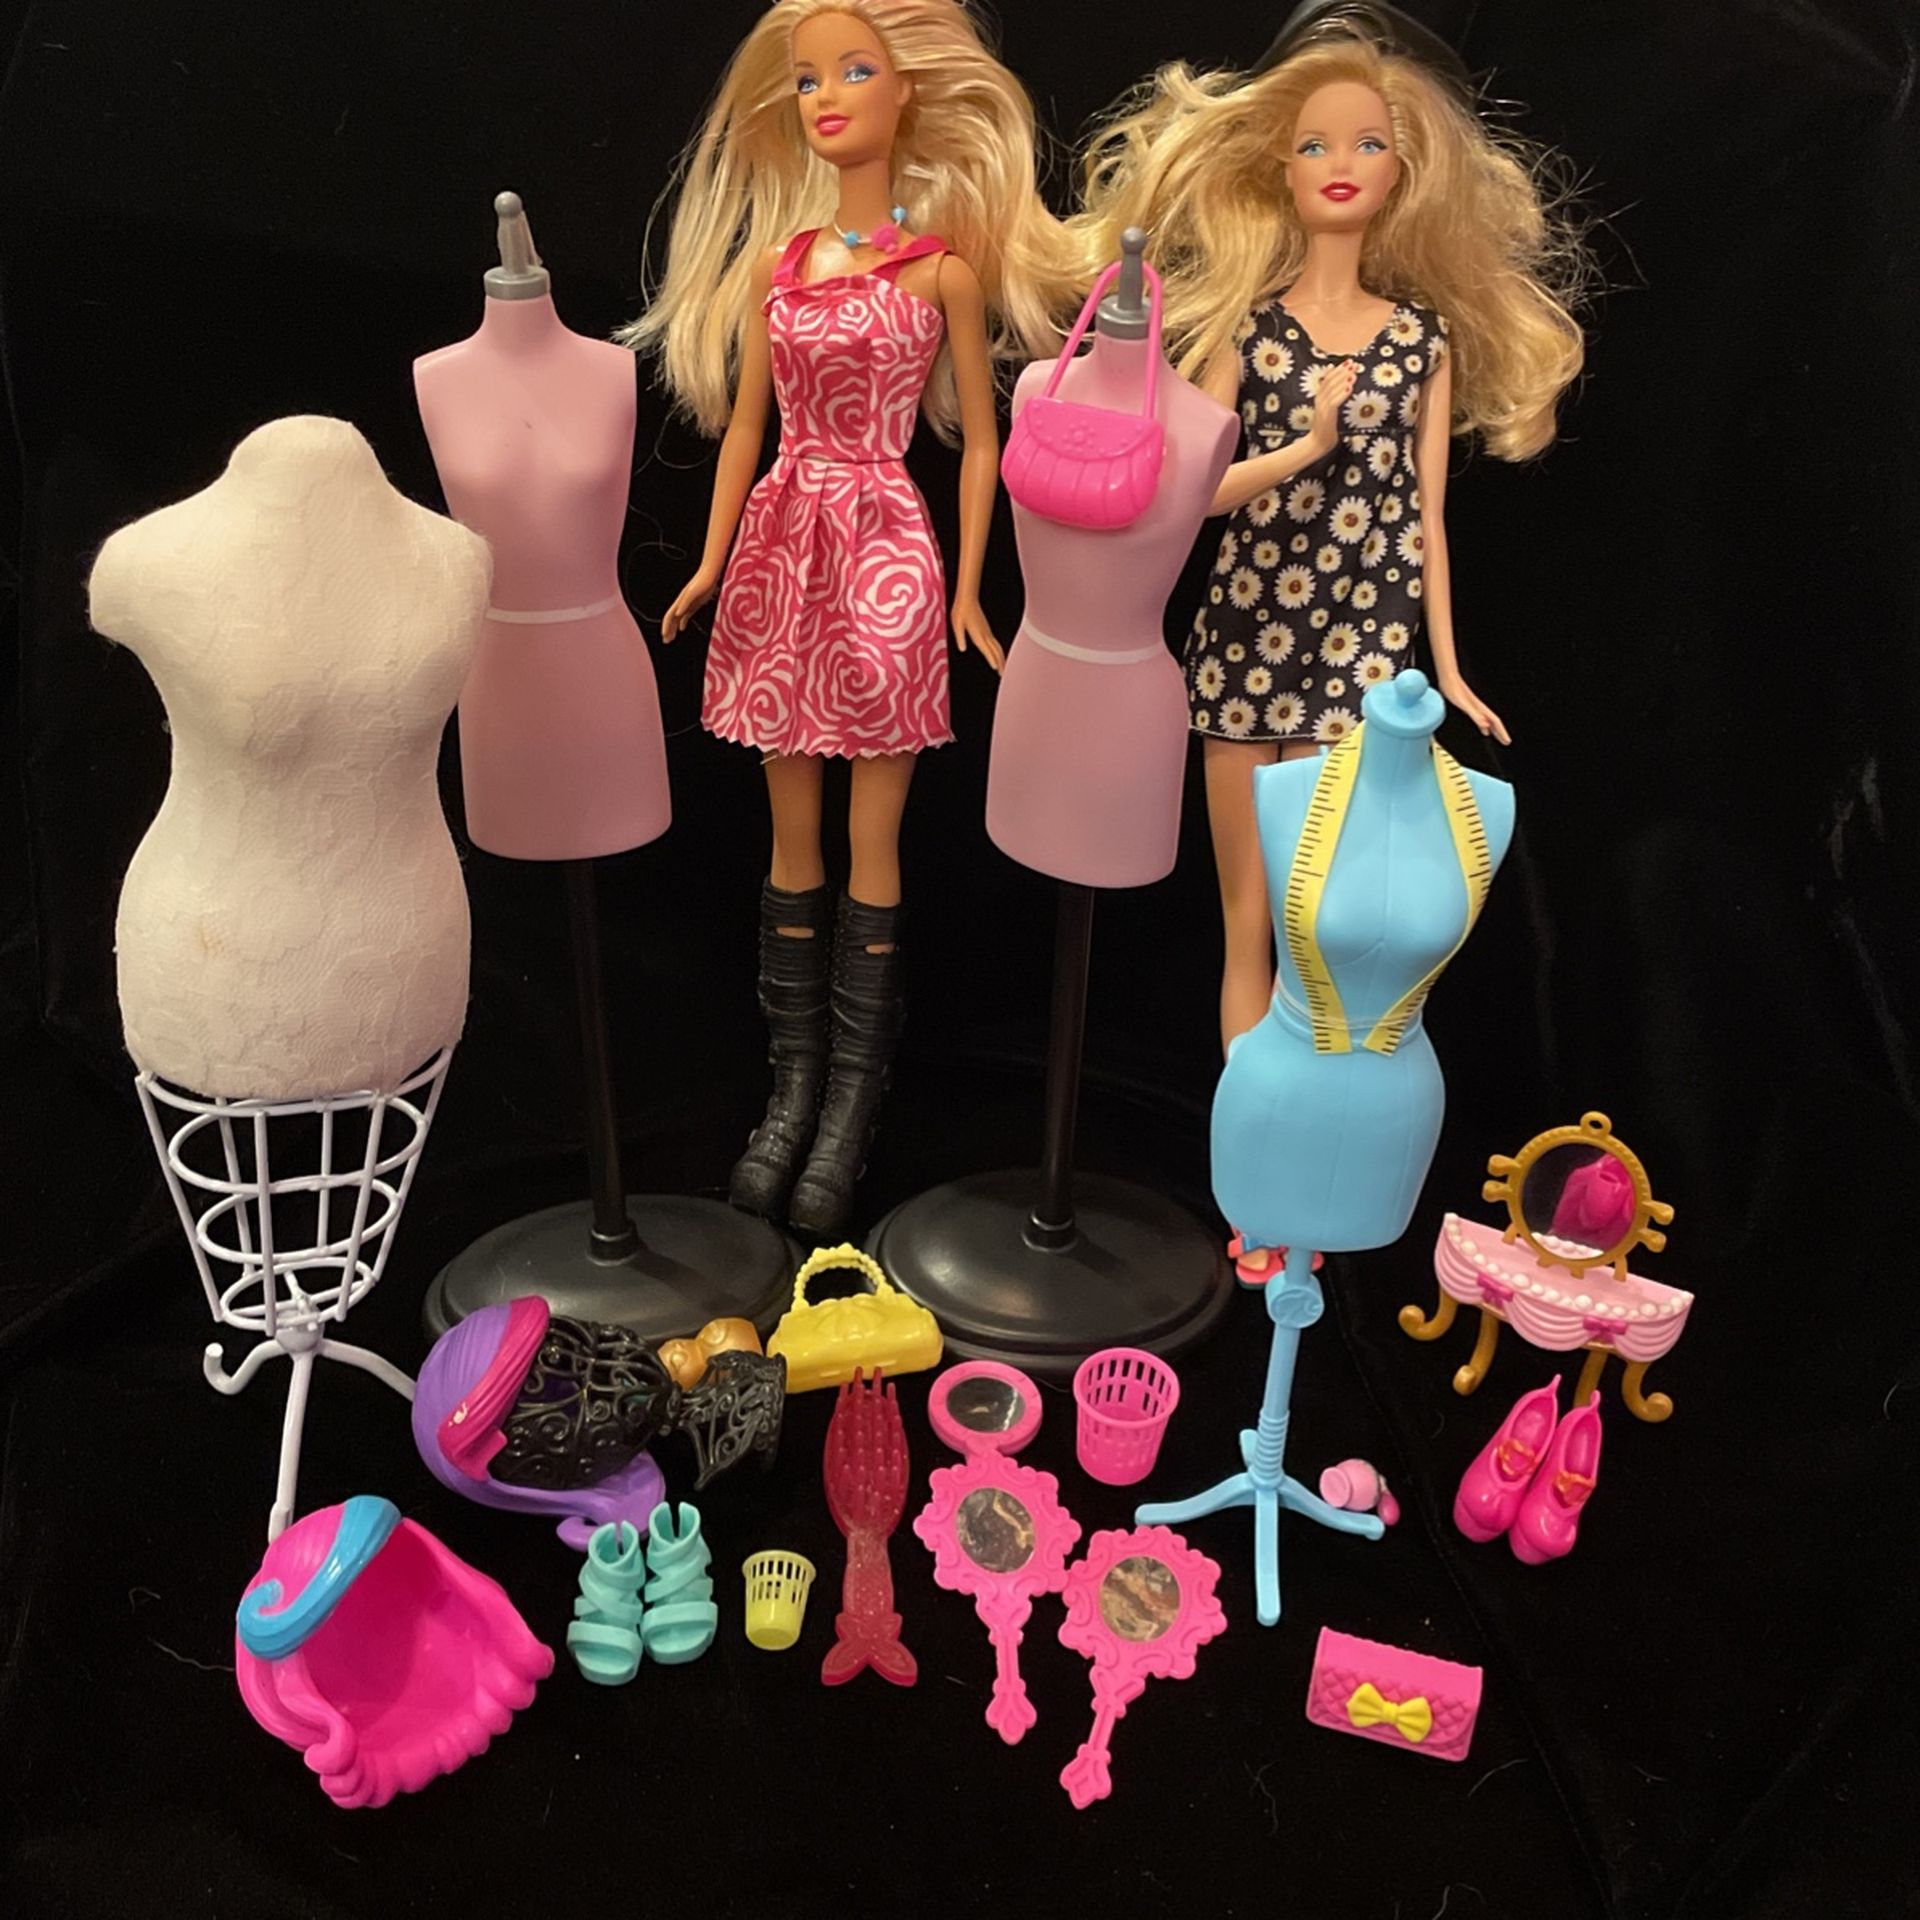 Fashion Barbie sold with accessories and mannequins